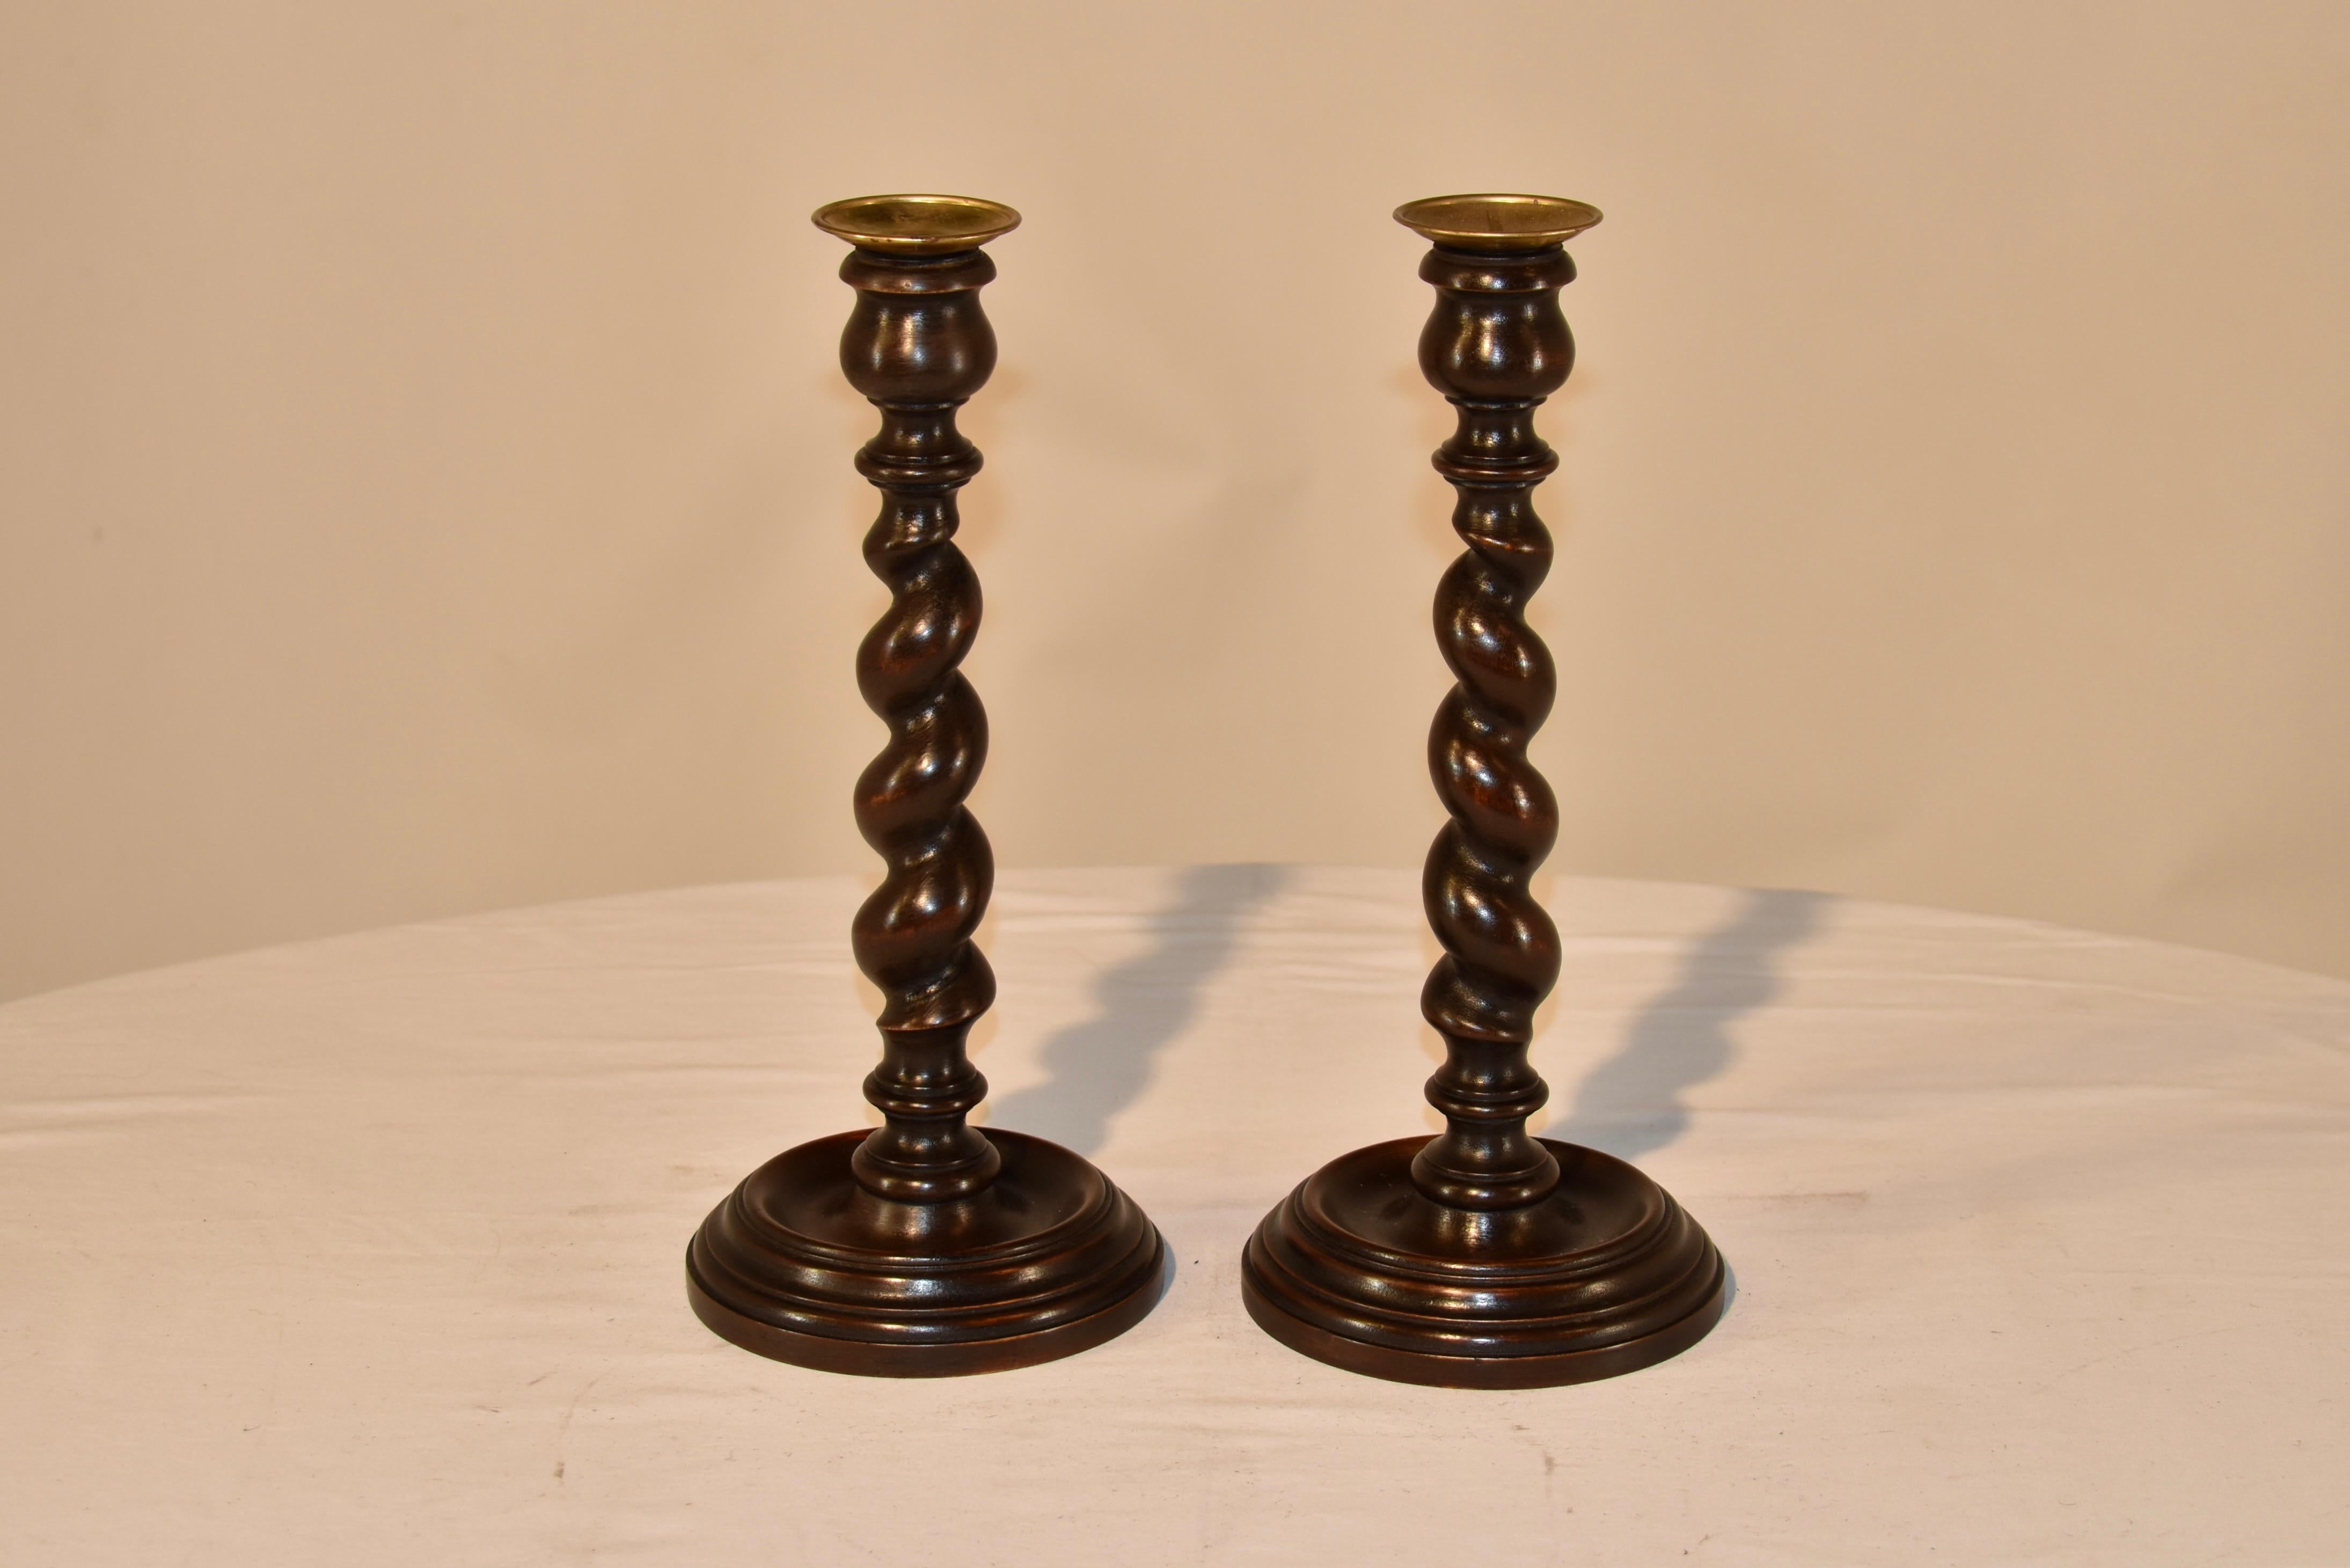 Pair of exquisite 19th century oak candlesticks from England with hand turned brass bobeches over tulip turned candle cups. The stems are hand turned barley twist and are supported on hand turned bases with lovely detail.